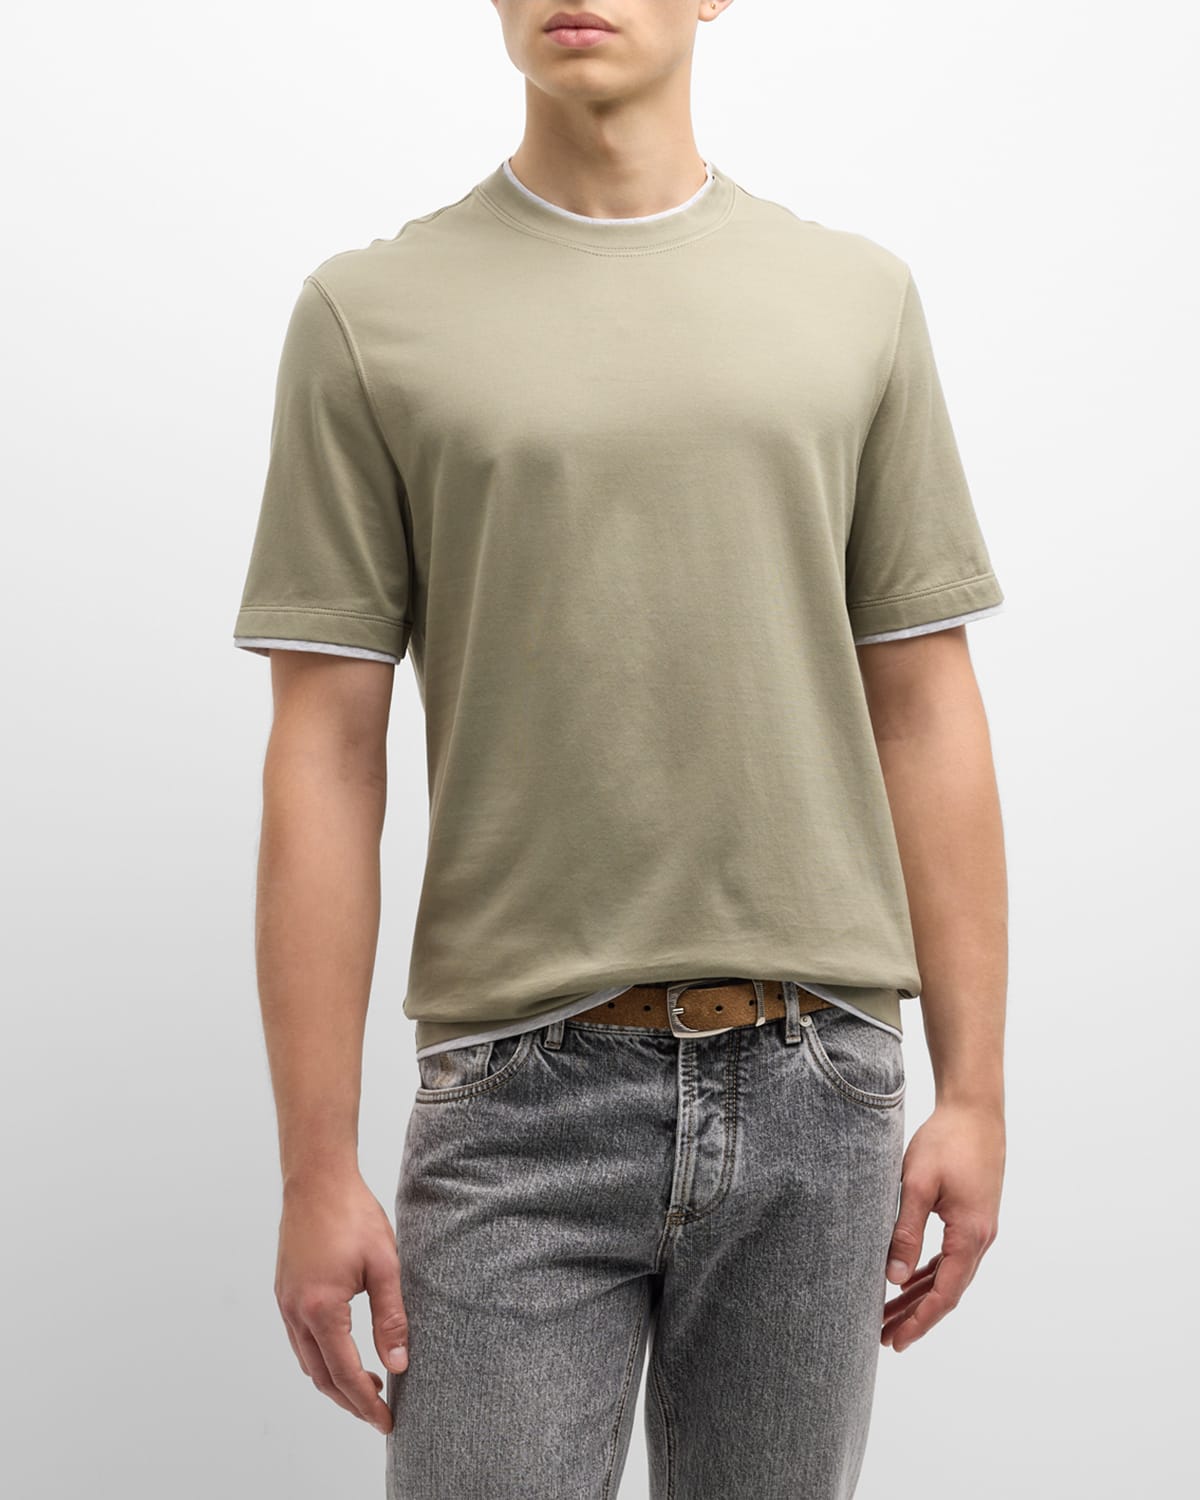 Brunello Cucinelli Men's Cotton Crewneck T-shirt With Tipping In Olive Green